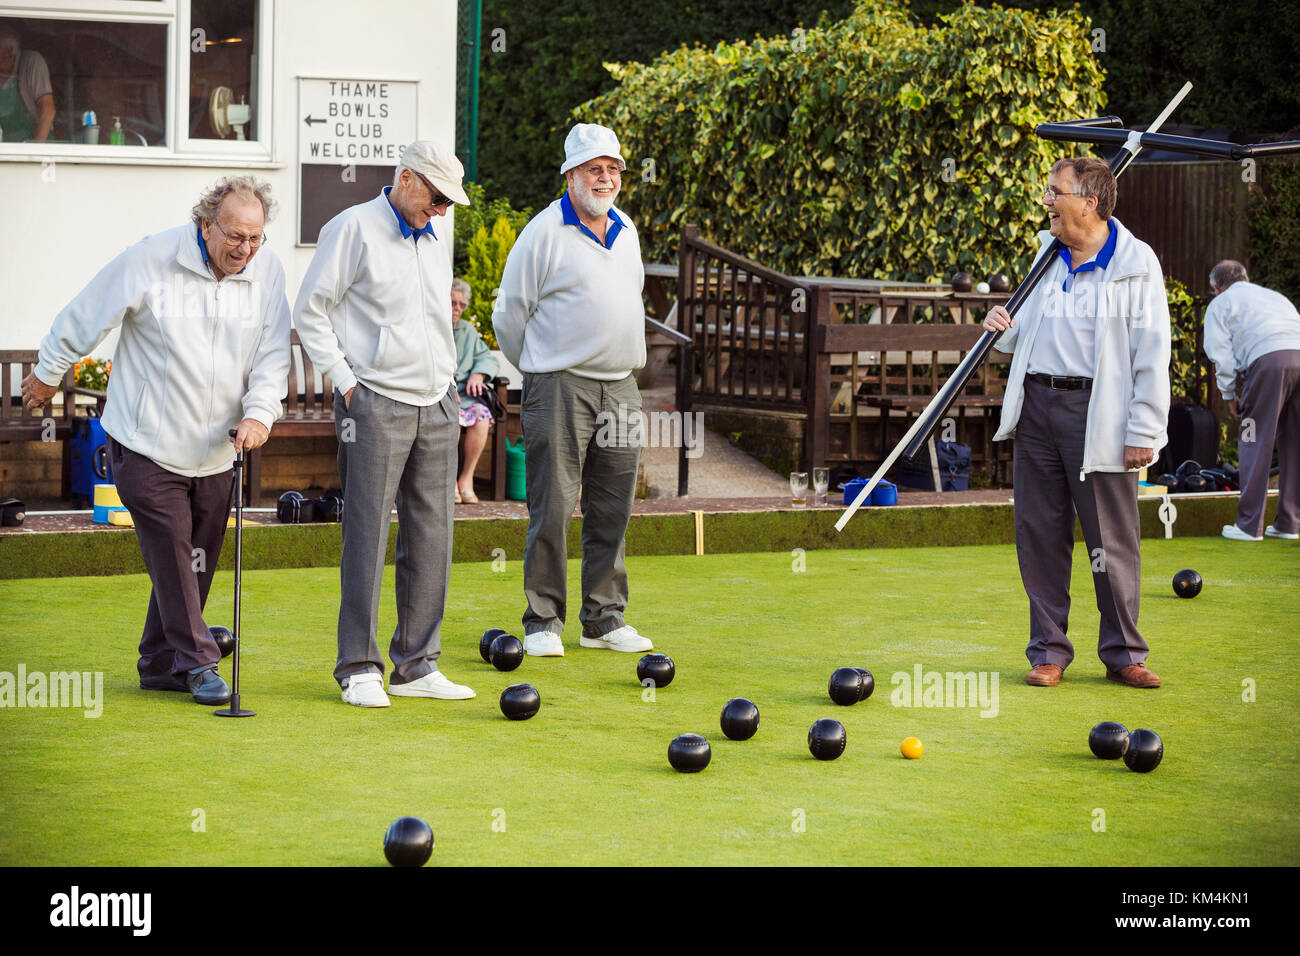 Four men on the lawn bowls green, one wearing an umpire's coat, at an end. Stock Photo